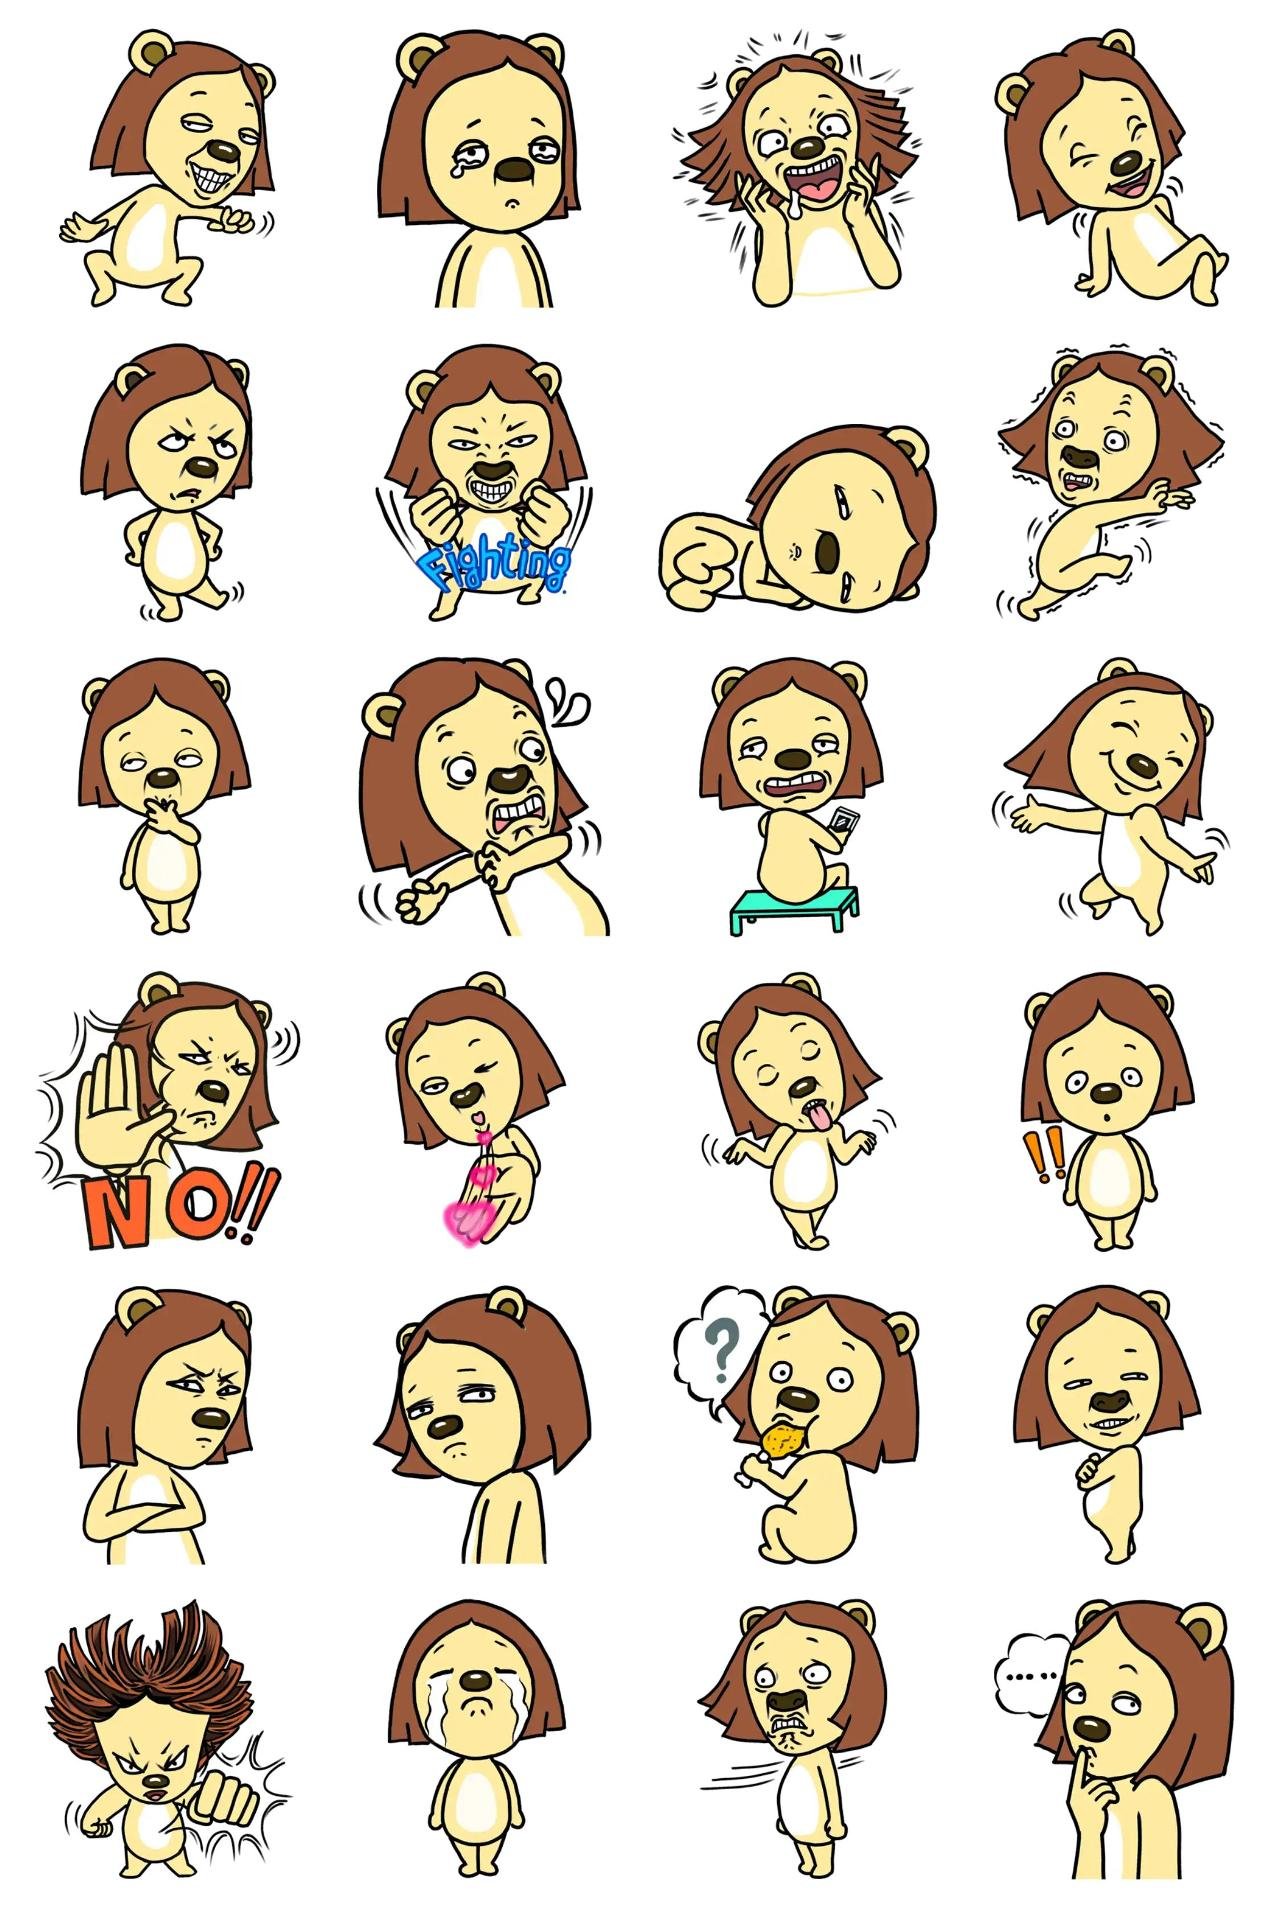 Lion Roy Animals sticker pack for Whatsapp, Telegram, Signal, and others chatting and message apps